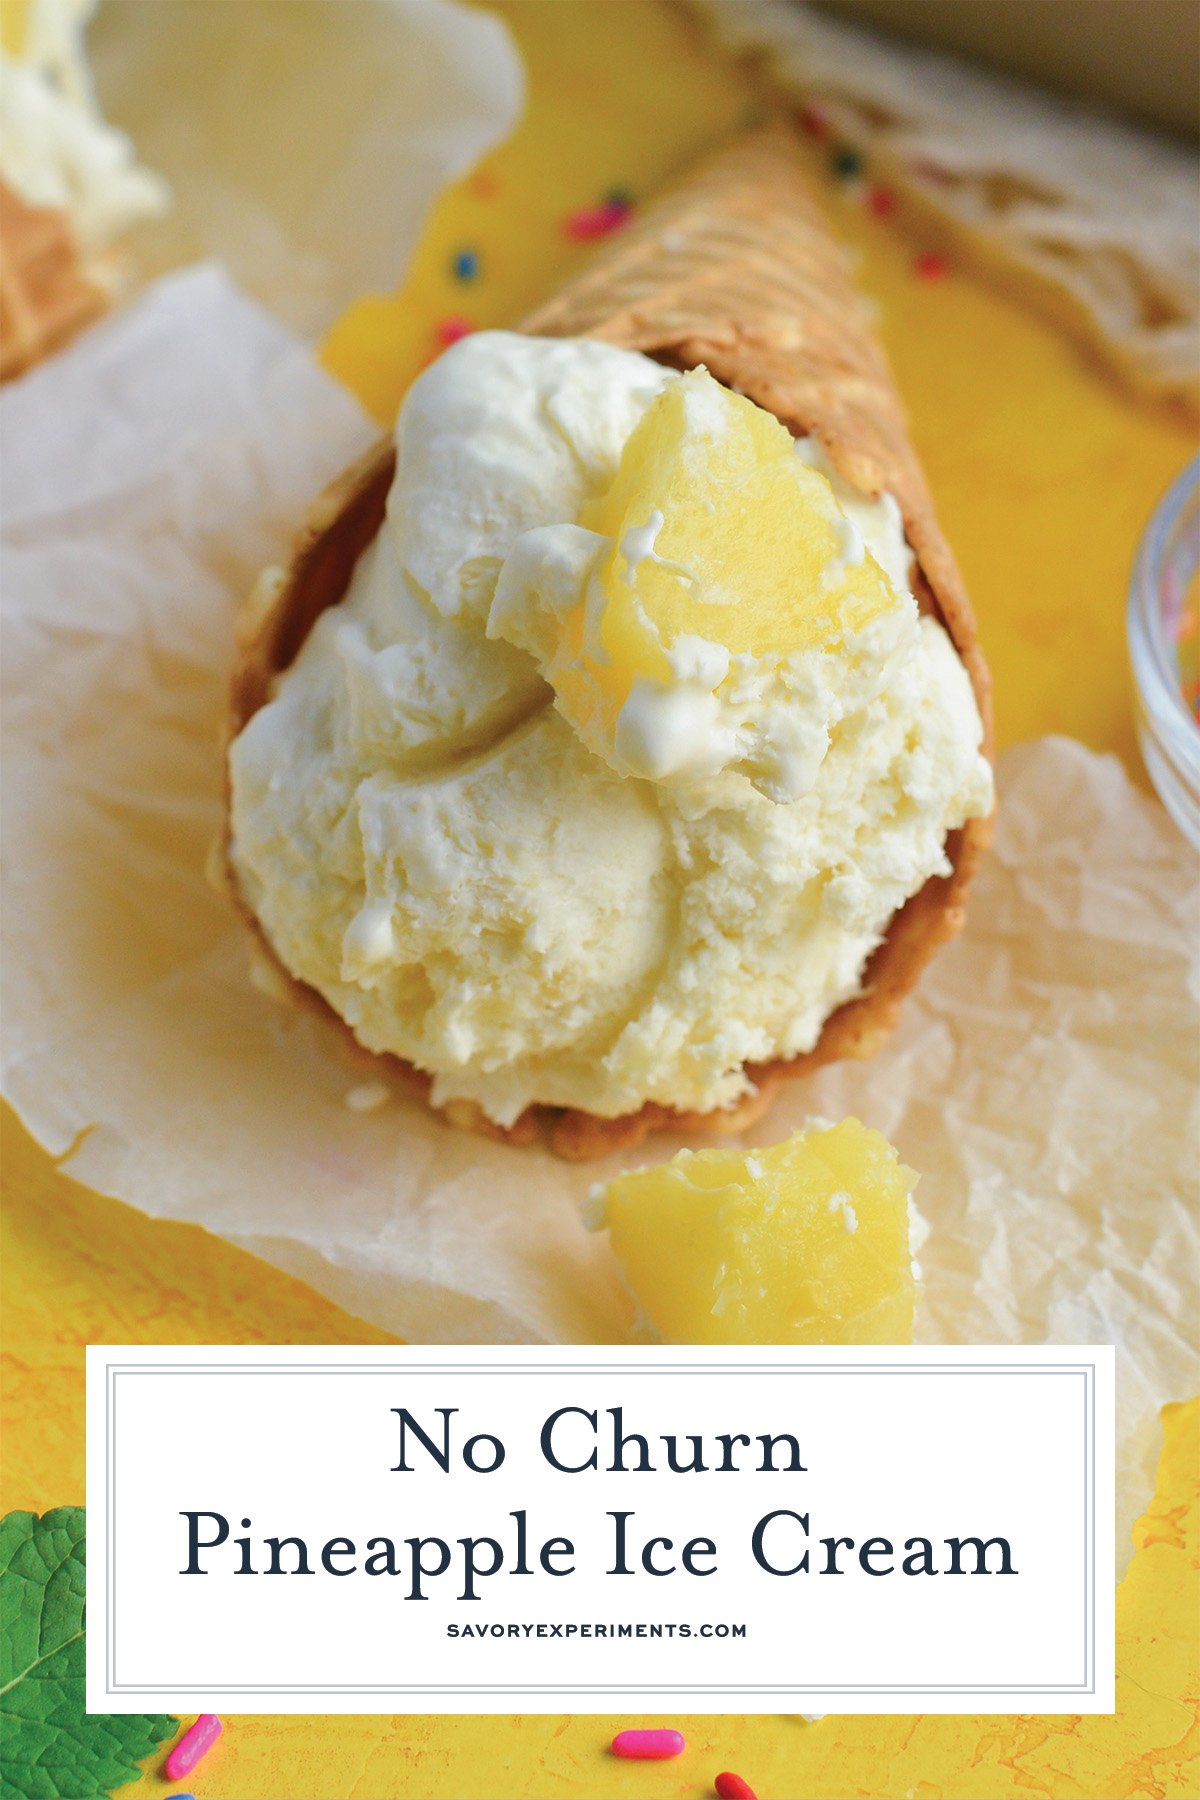 waffle cone with homemade pineapple ice cream and text overlay